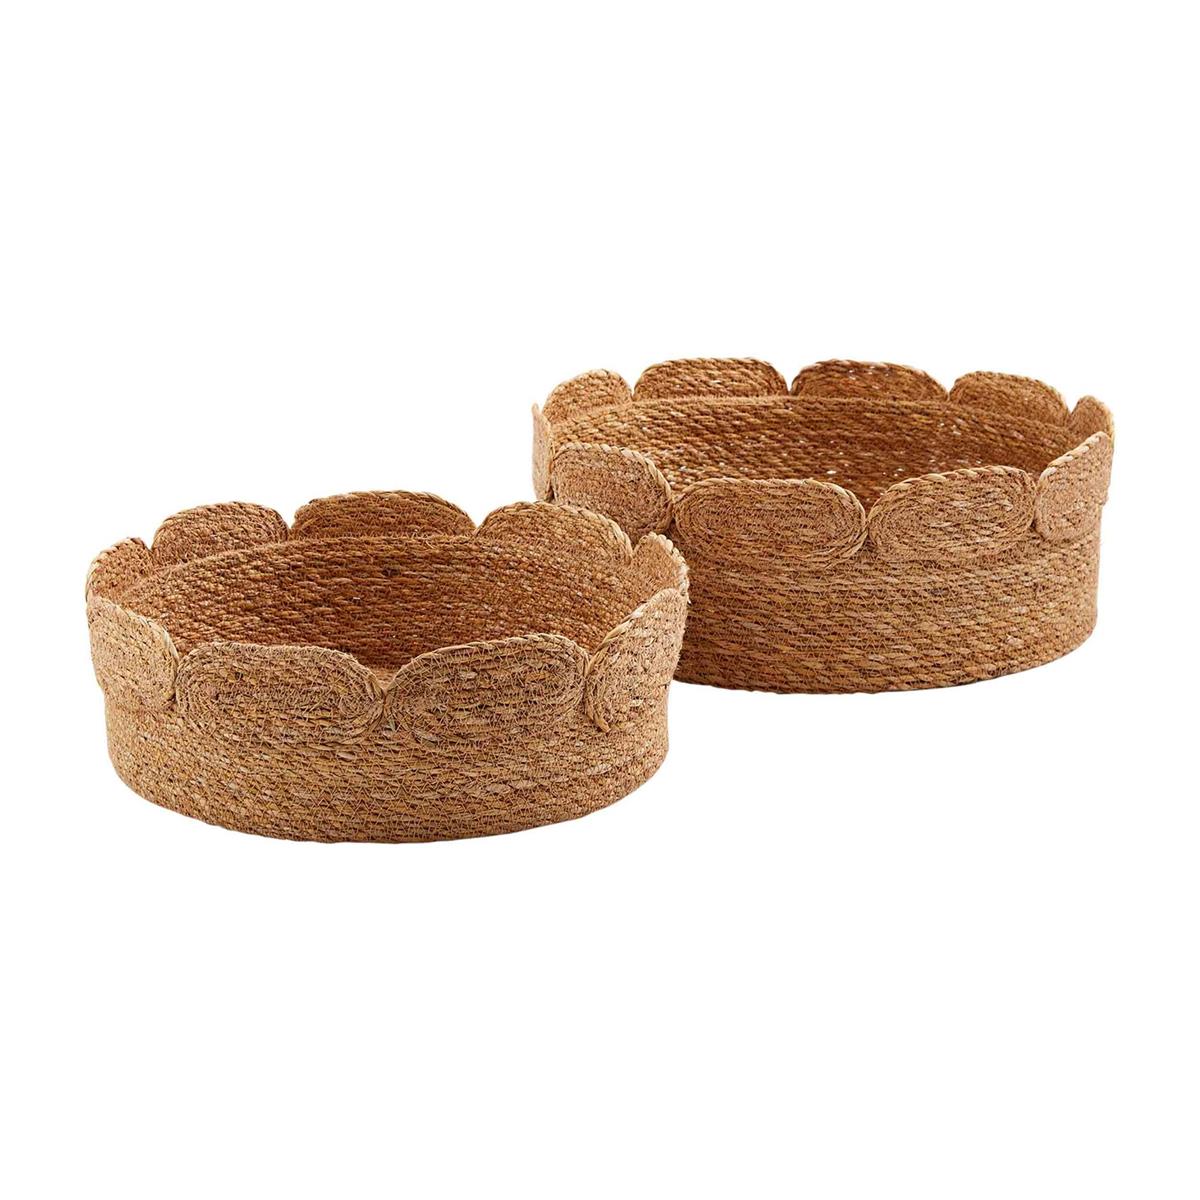 small and large scalloped jute baskets set beside each other against a white background